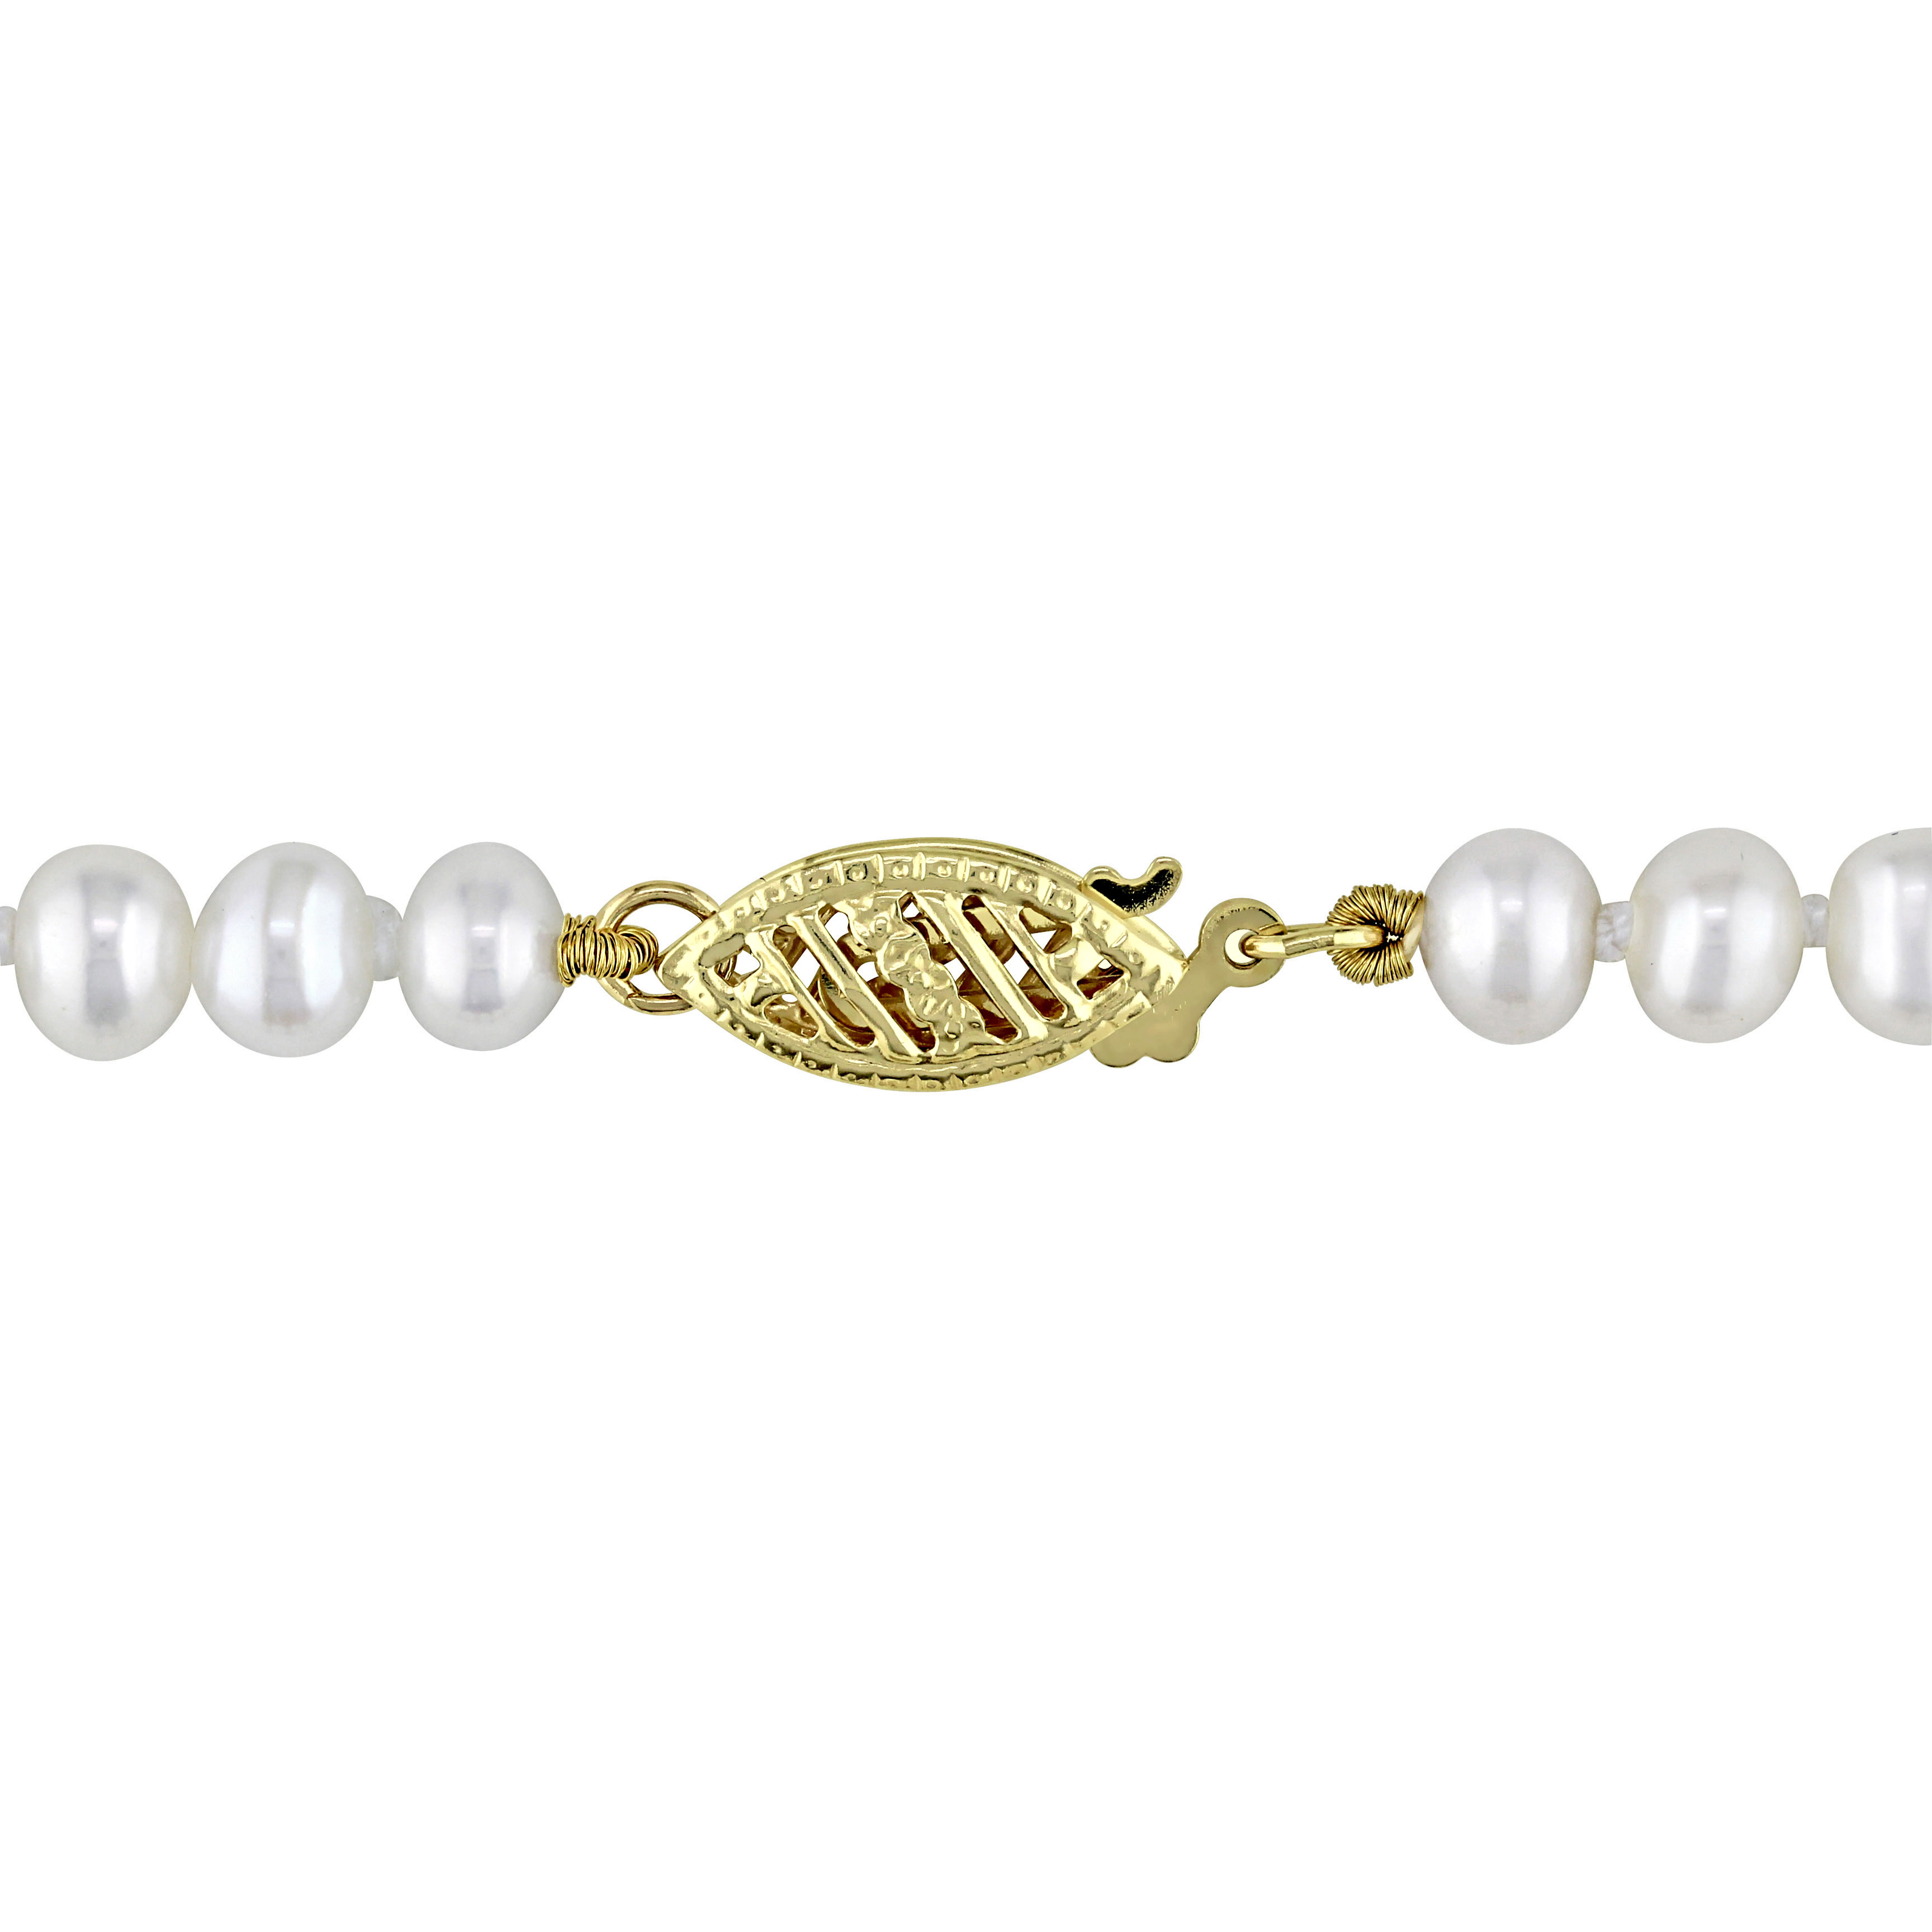 4-8mm Freshwater Pearl Strand Graduated Necklace with 14k Yellow Gold Clasp - 18 in